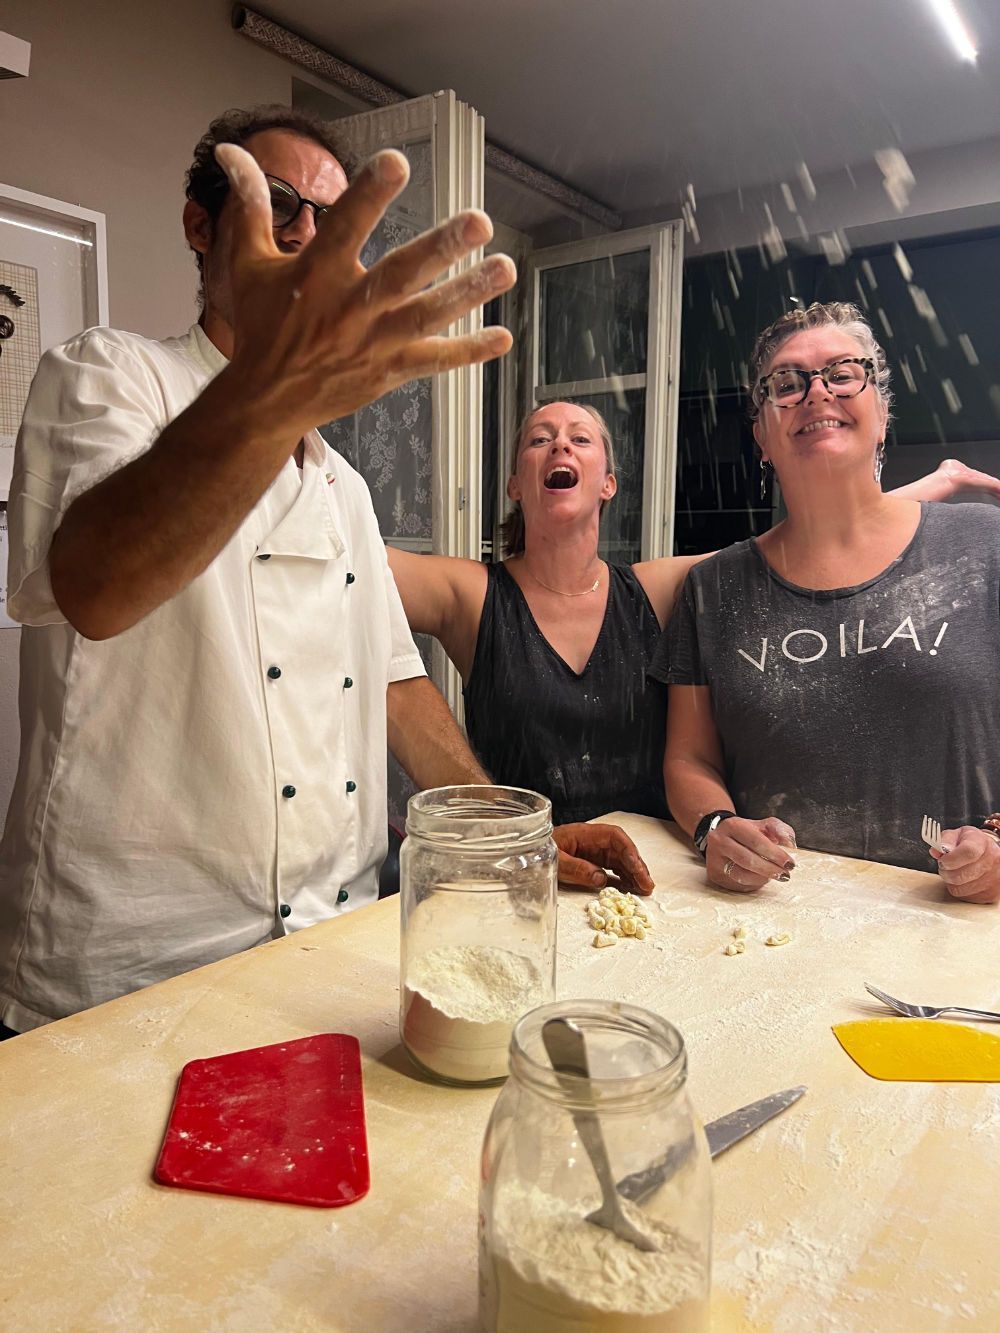 A man and two women are sitting at a table throwing flour in the air.